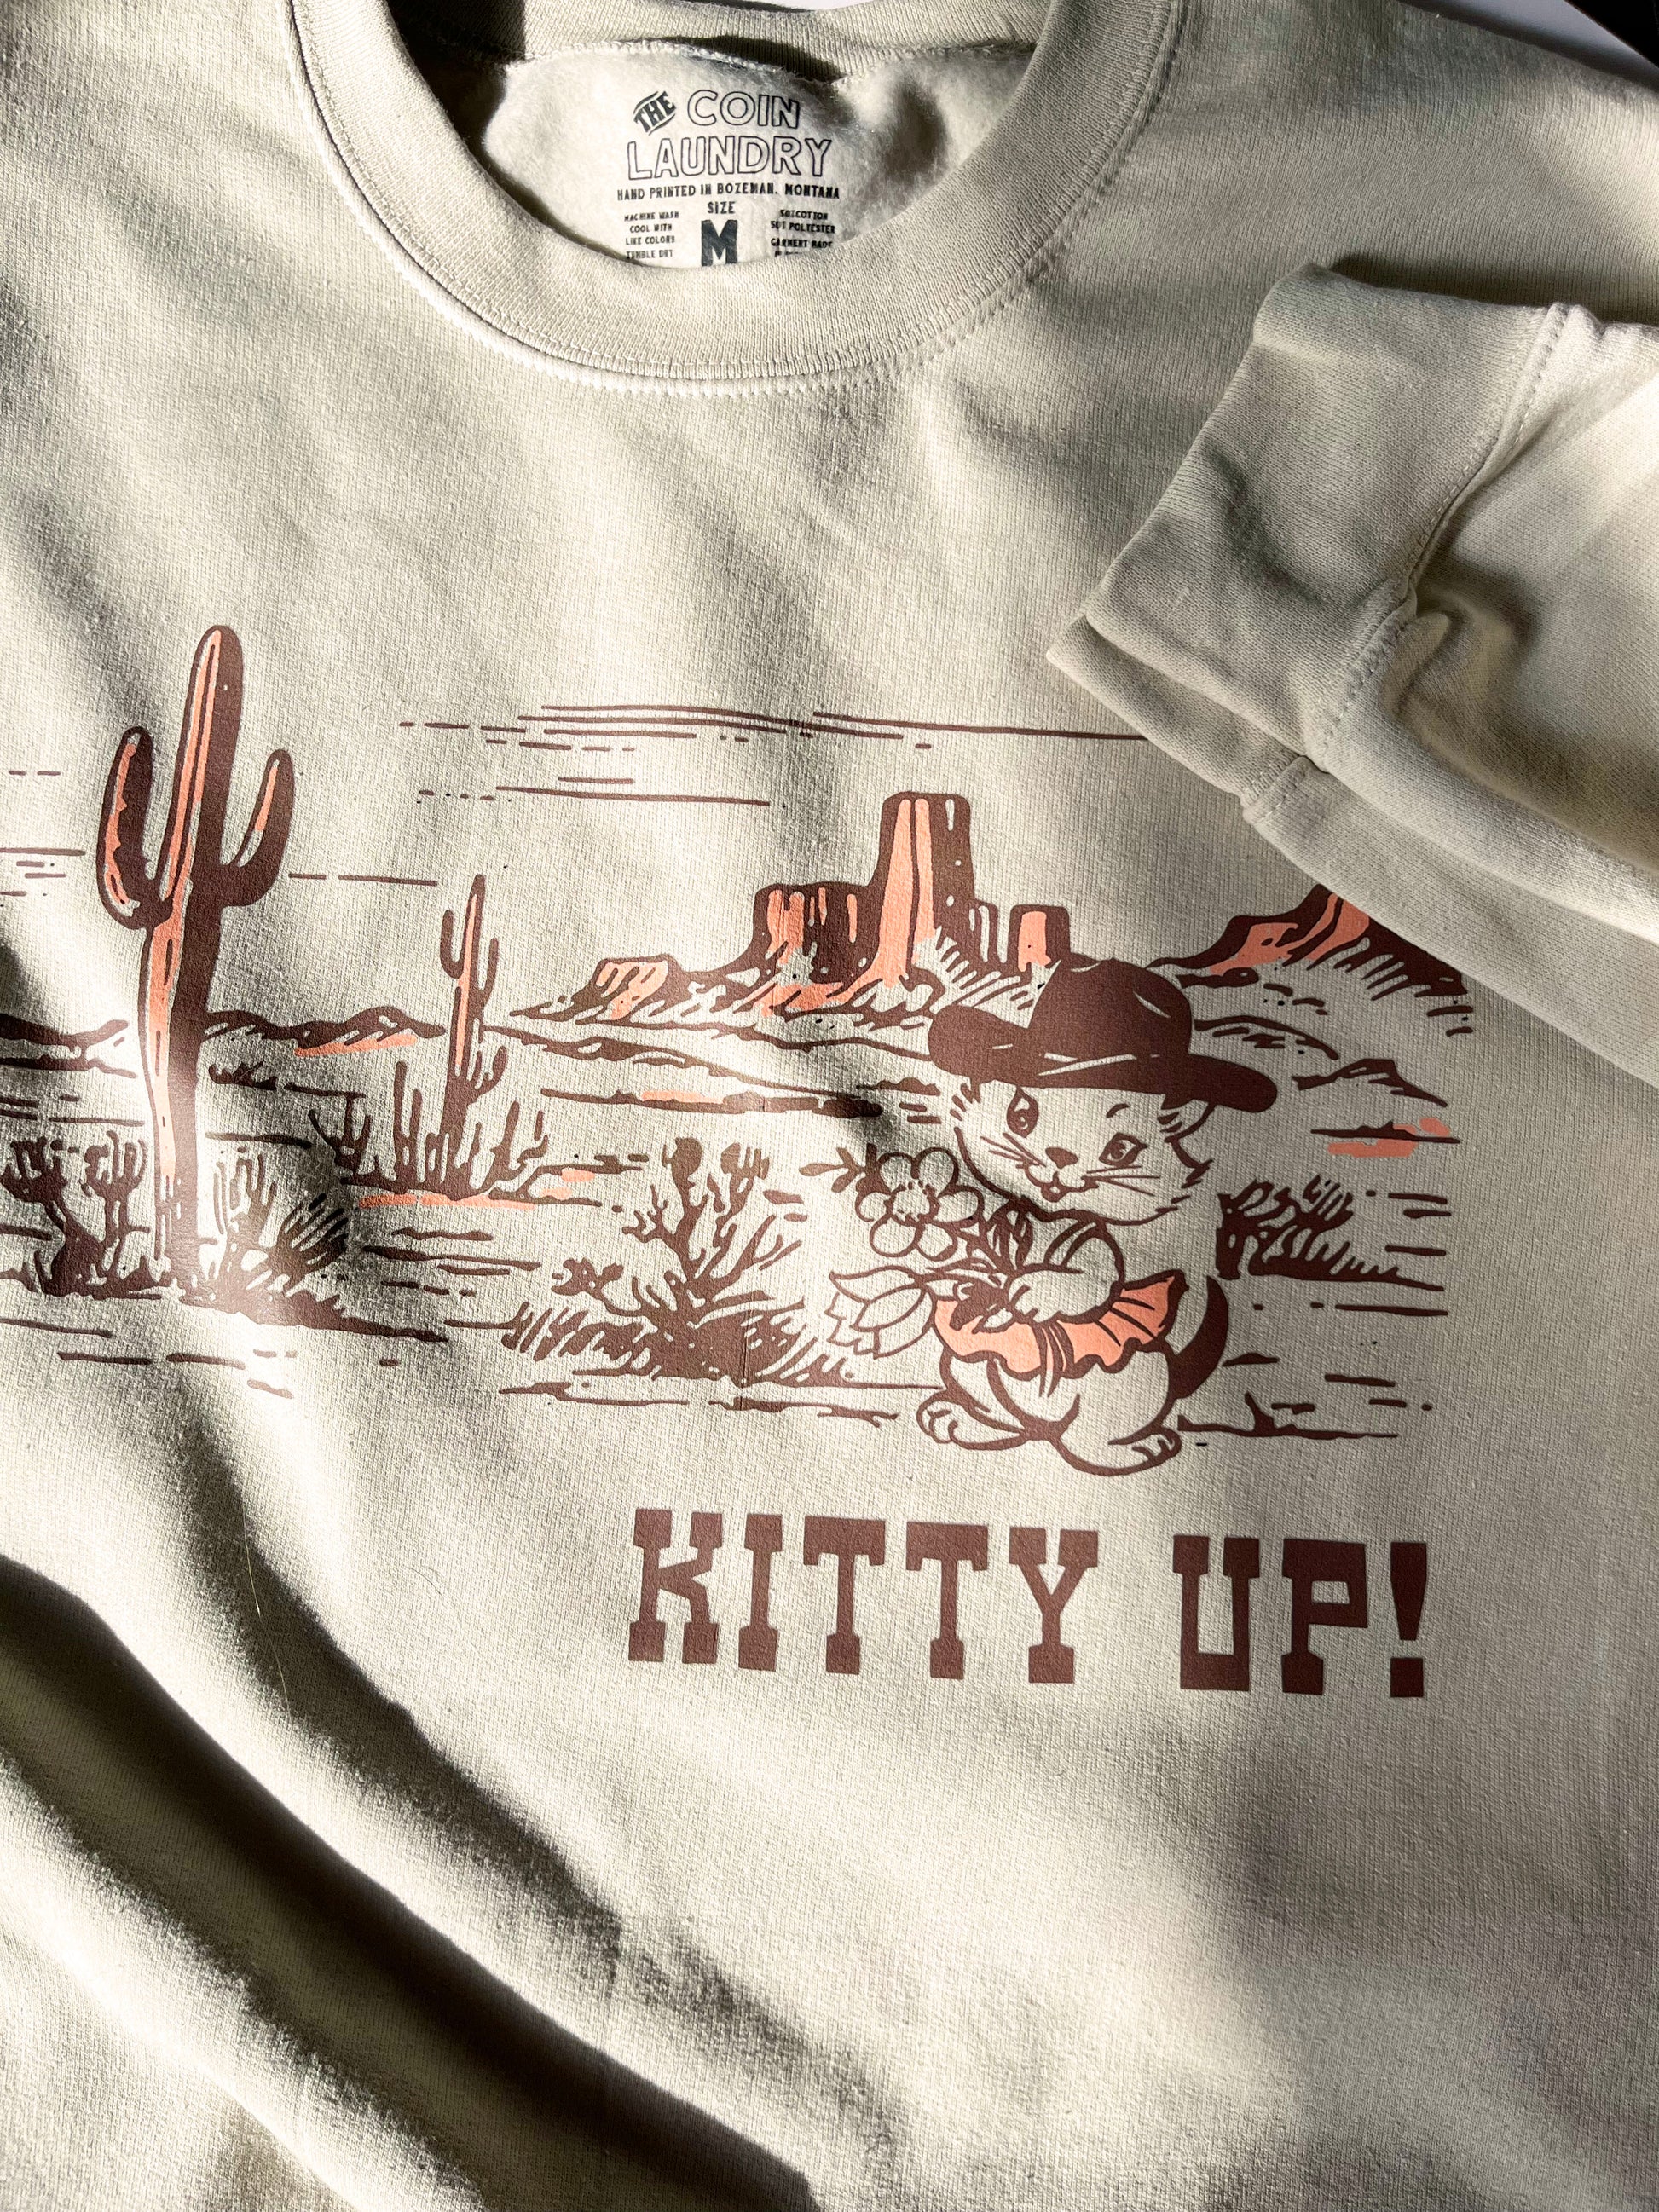 cute cat sweatshirt kitty up giddy up funny cowgirl western fashion cozy sweats coin laundry screen print kitten retro vintage style 